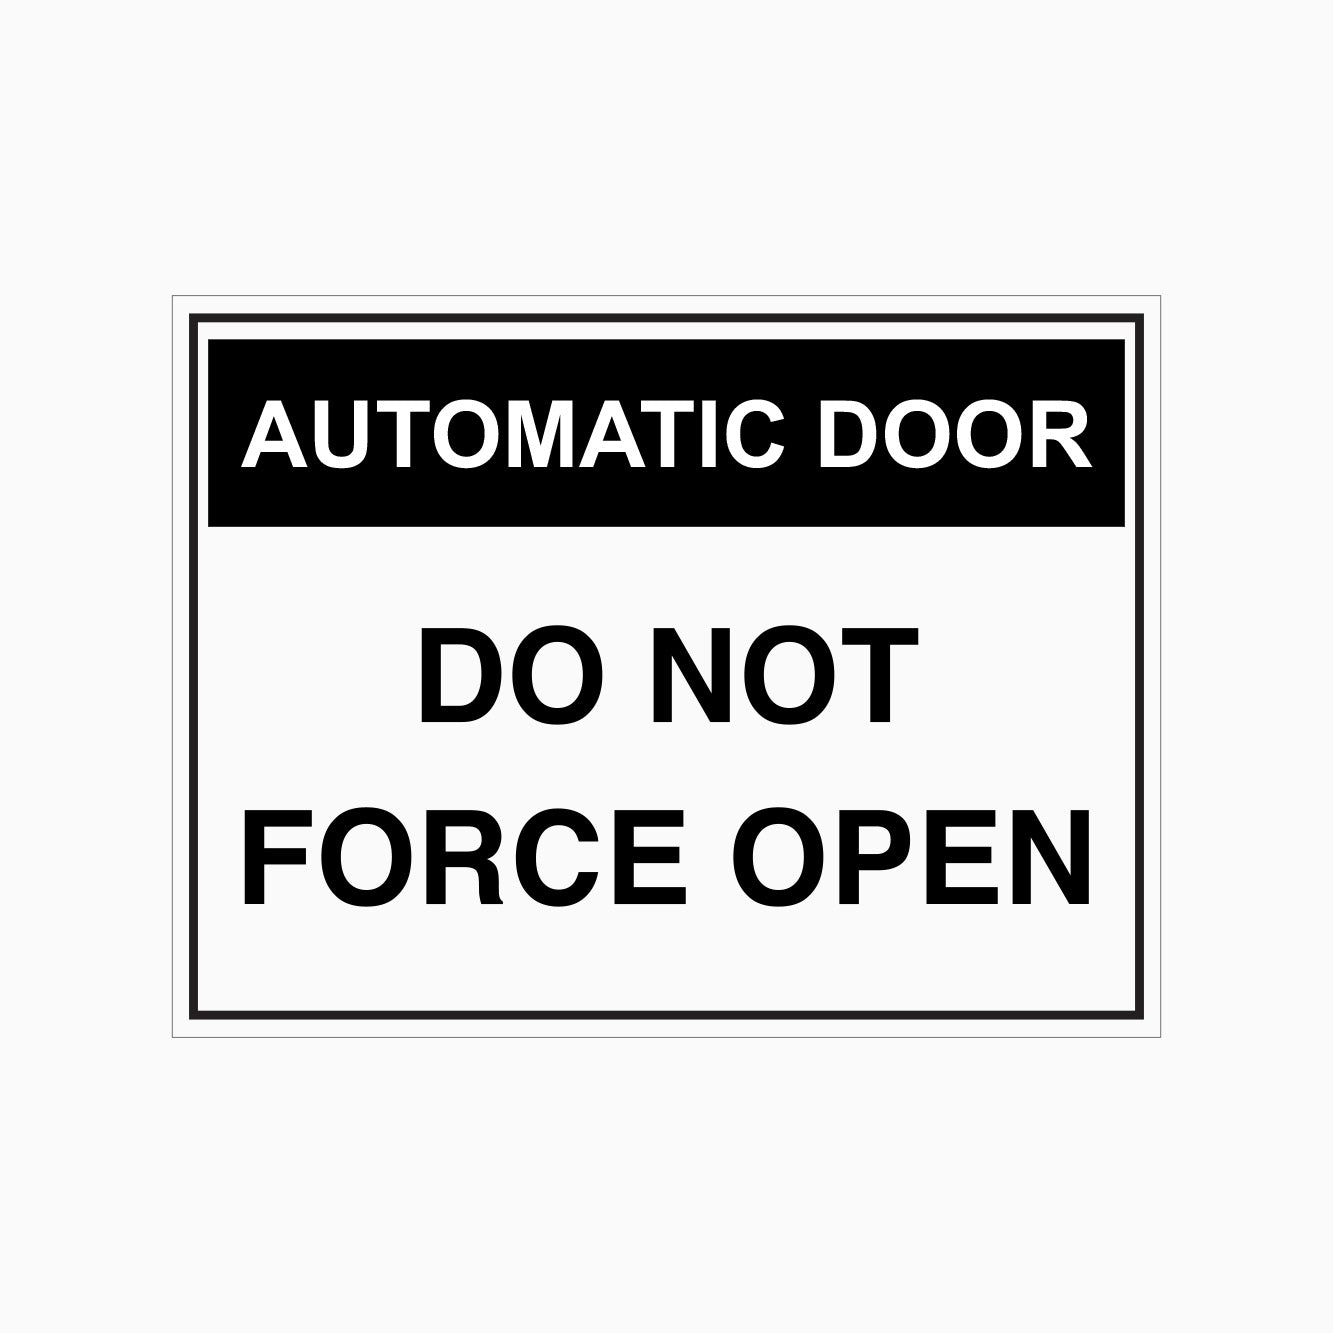 AUTOMATIC DOOR SIGN - DO NOT FORCE OPEN SIGN